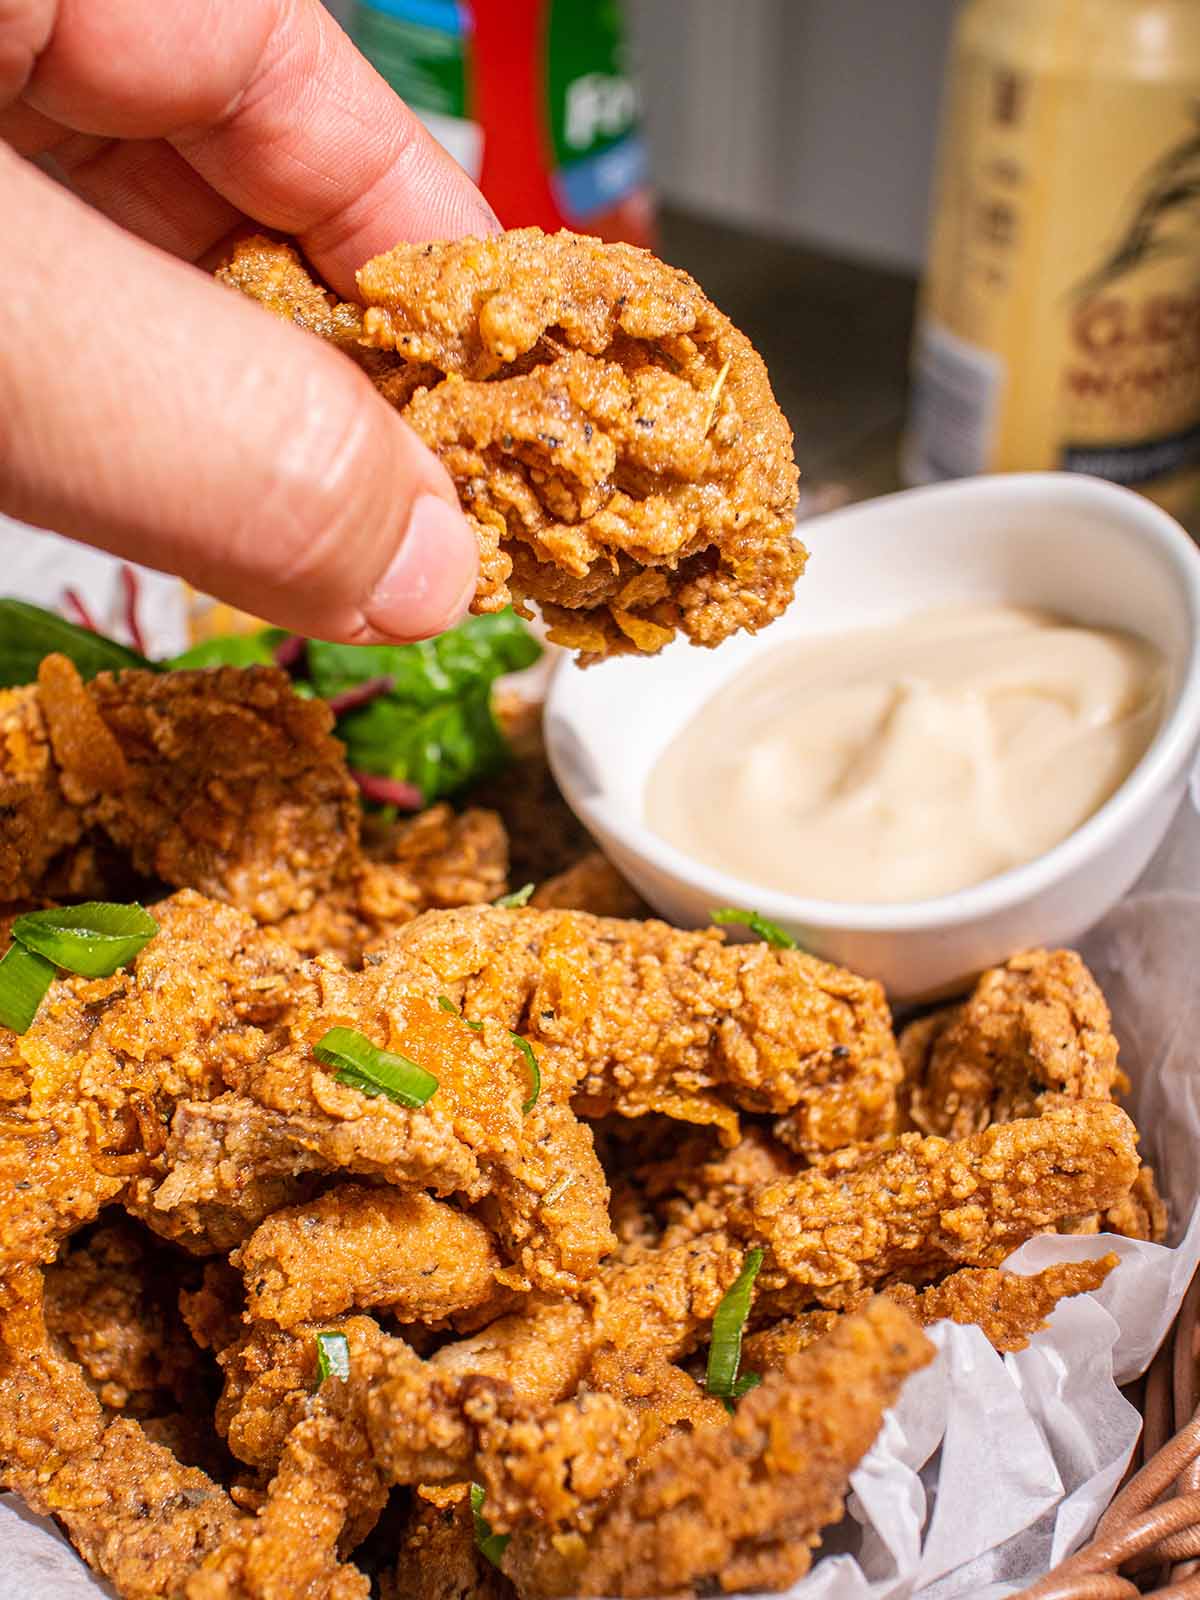 pick up a piece of fried oyster mushrooms (vegan fried chicken)